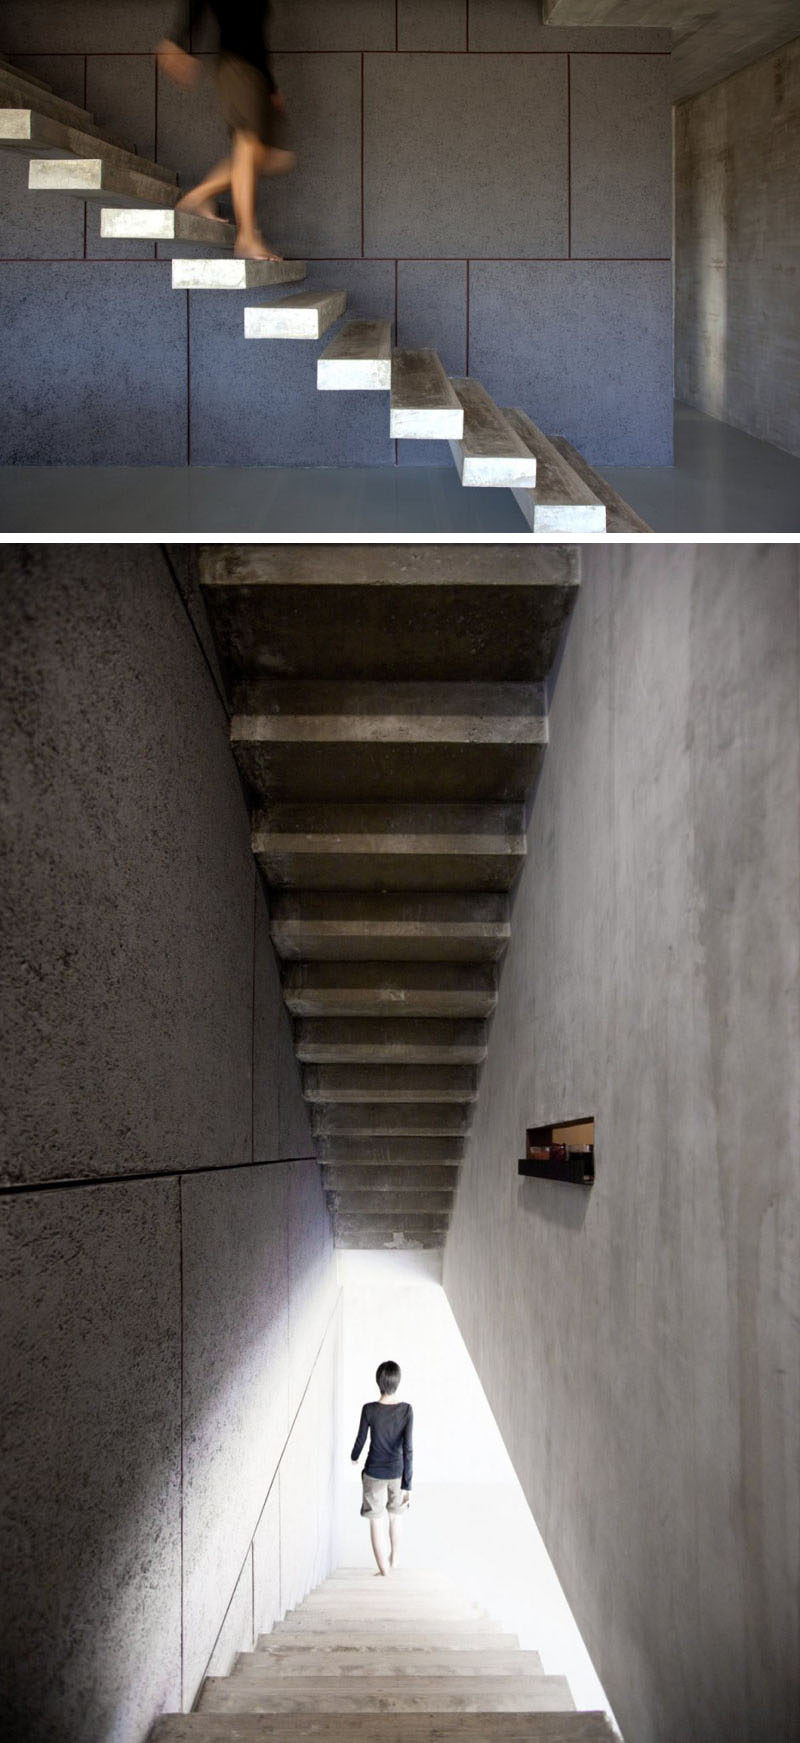 Floating concrete stairs take you to the upper floor of this Thai home.